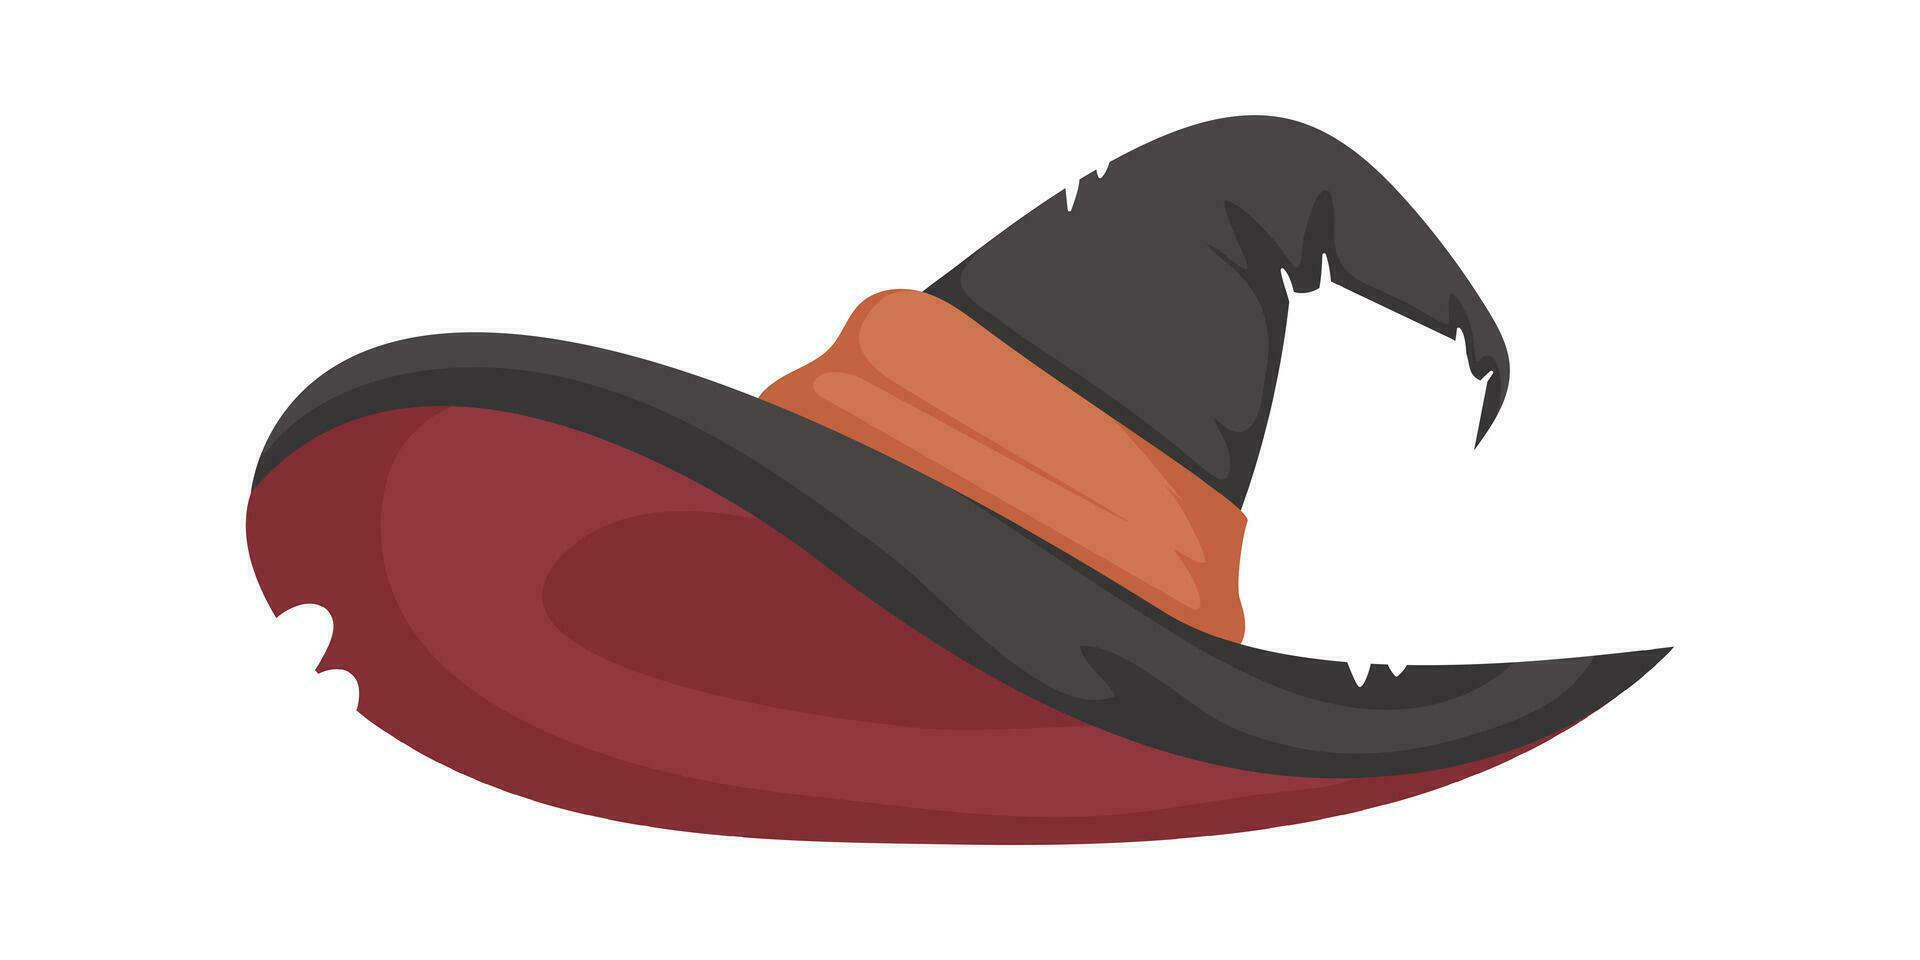 Big pointy hat that witches wear. Halloween hat that looks like a cap. Cartoon style, Vector Illustration